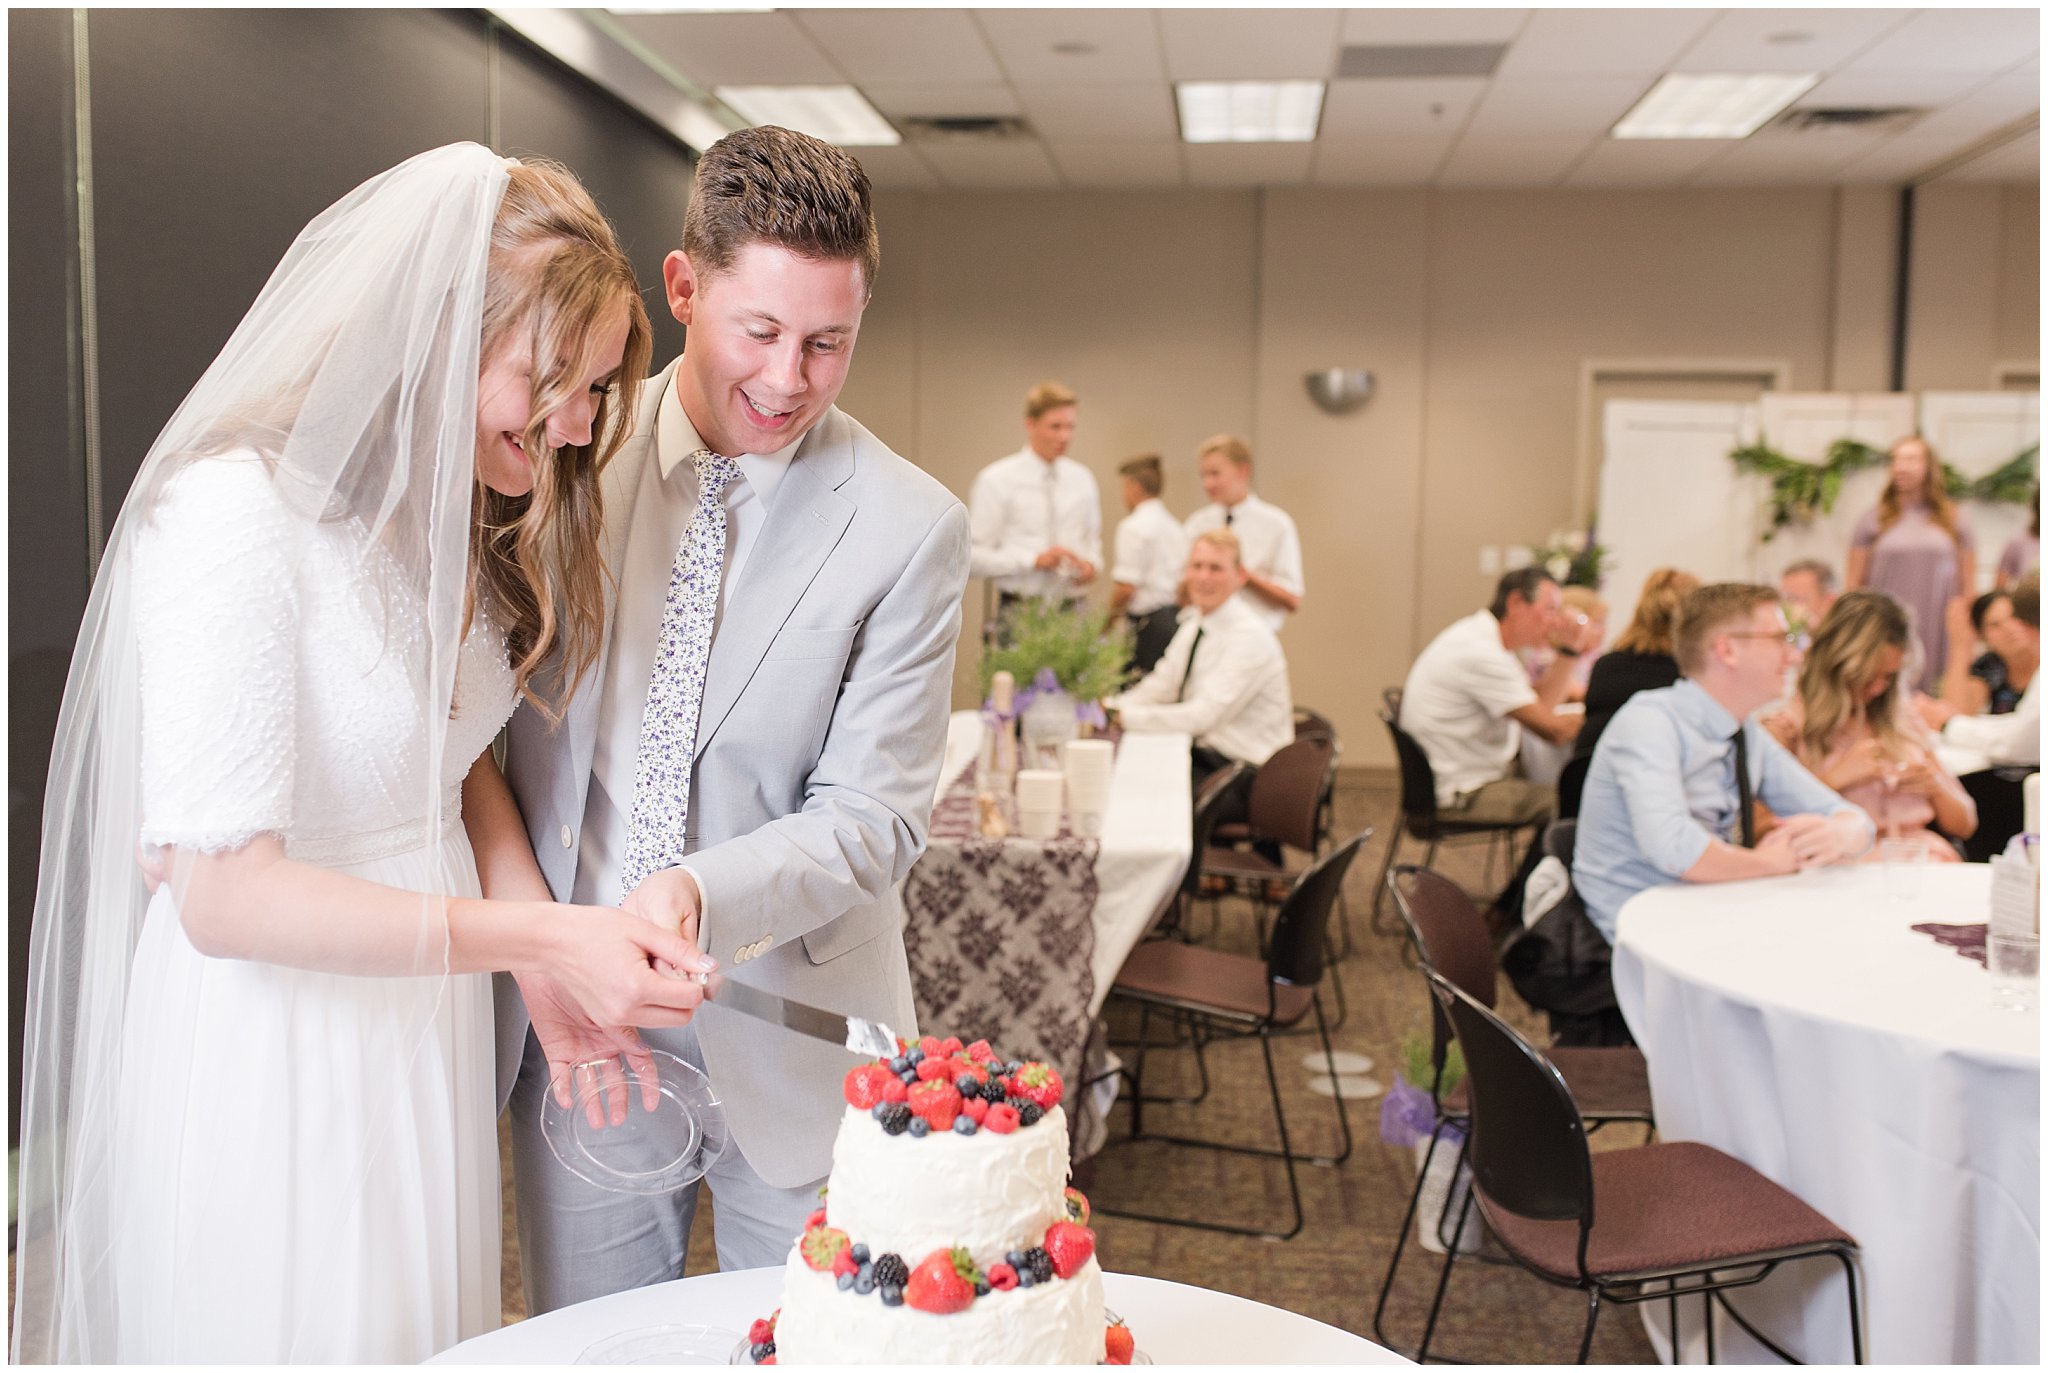 Bride and groom cut berry wedding cake | Salt Lake Temple Wedding and Clearfield City Hall Reception | Utah Wedding Photographers | Jessie and Dallin Photography